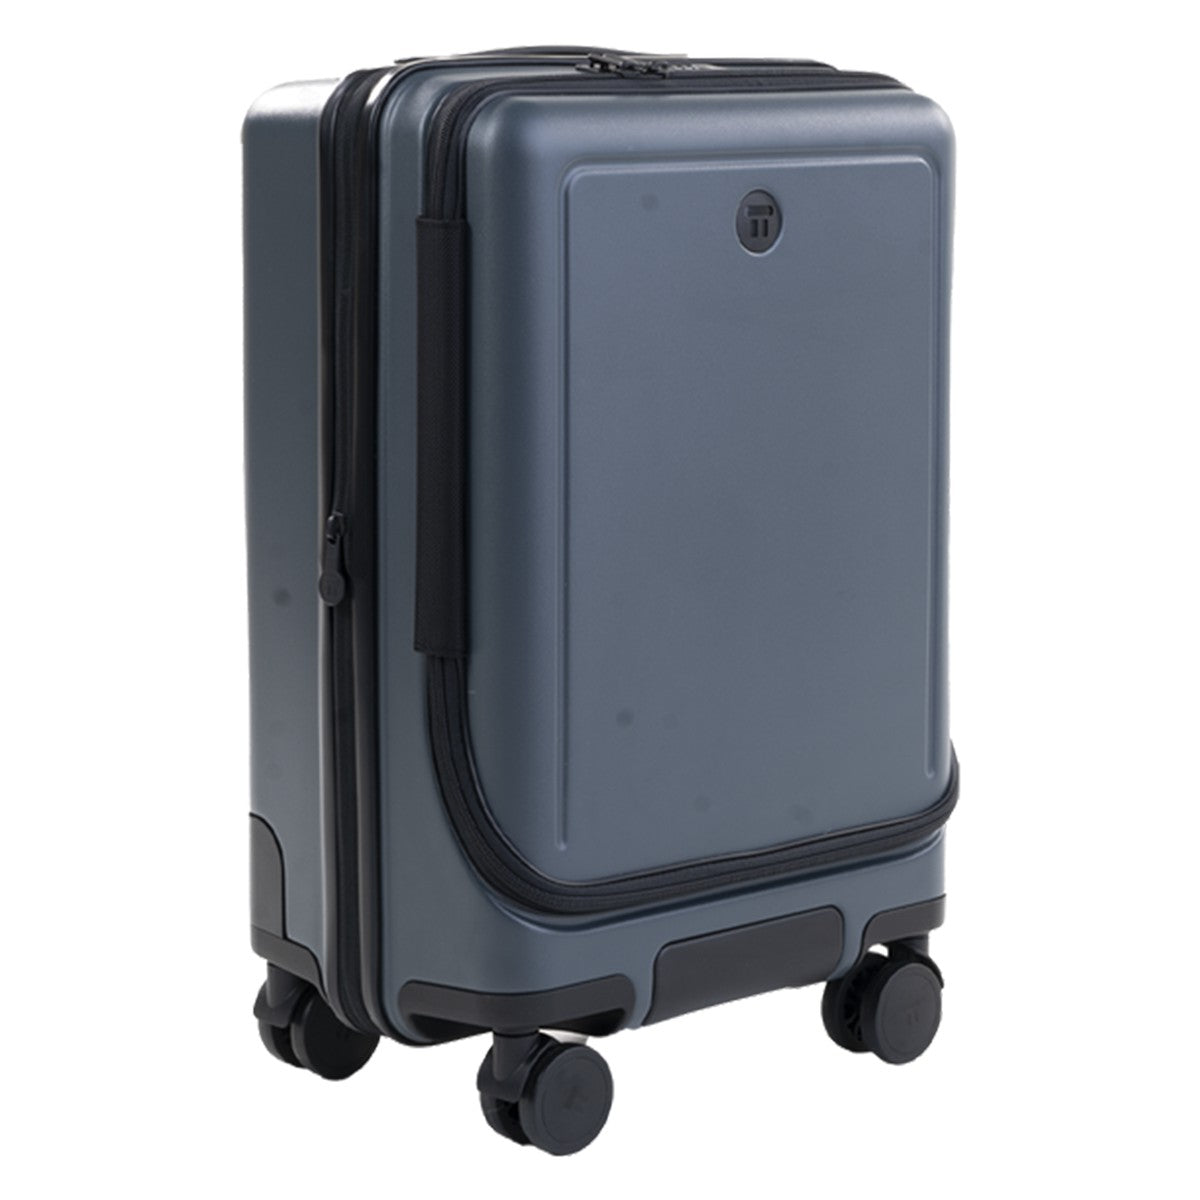 Props 22" Carry-On Spinner Luggage